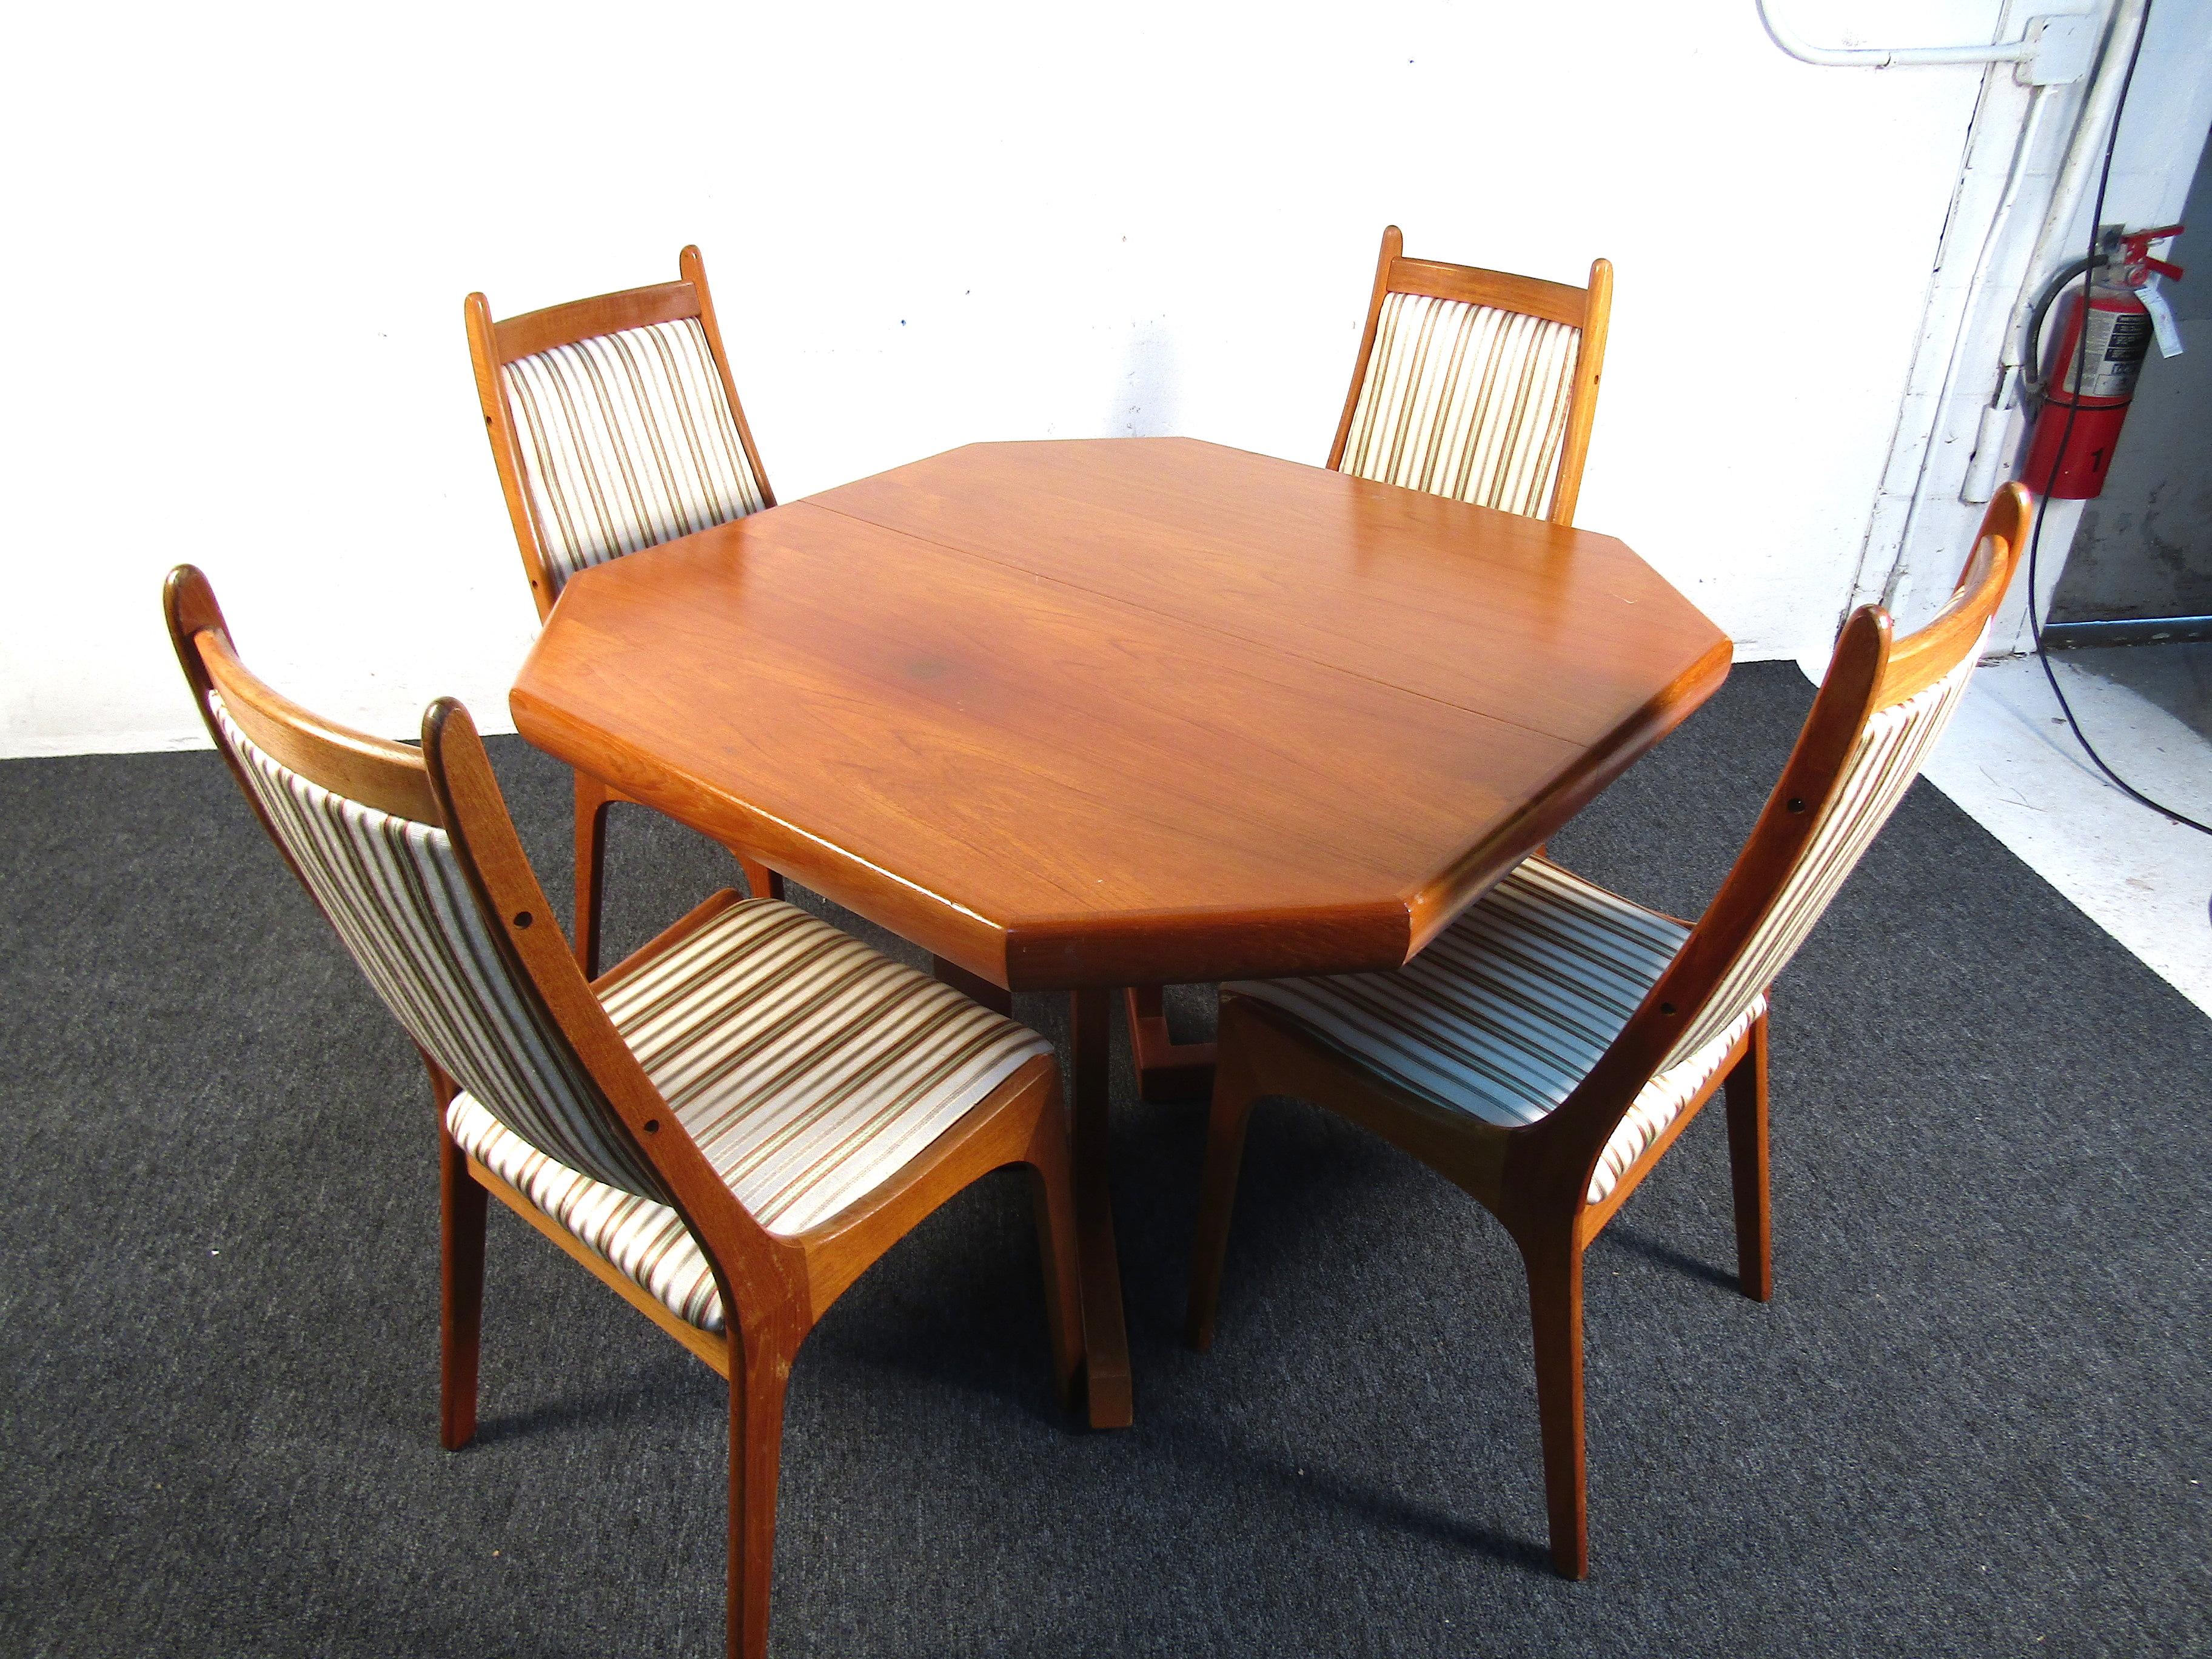 This beautiful teak wood Danish dining set features a beautifully upholstered chair and two additional leaves for when a larger table is needed. Beautiful in design with tons of functionality this set will add a presence to any home. It is able to